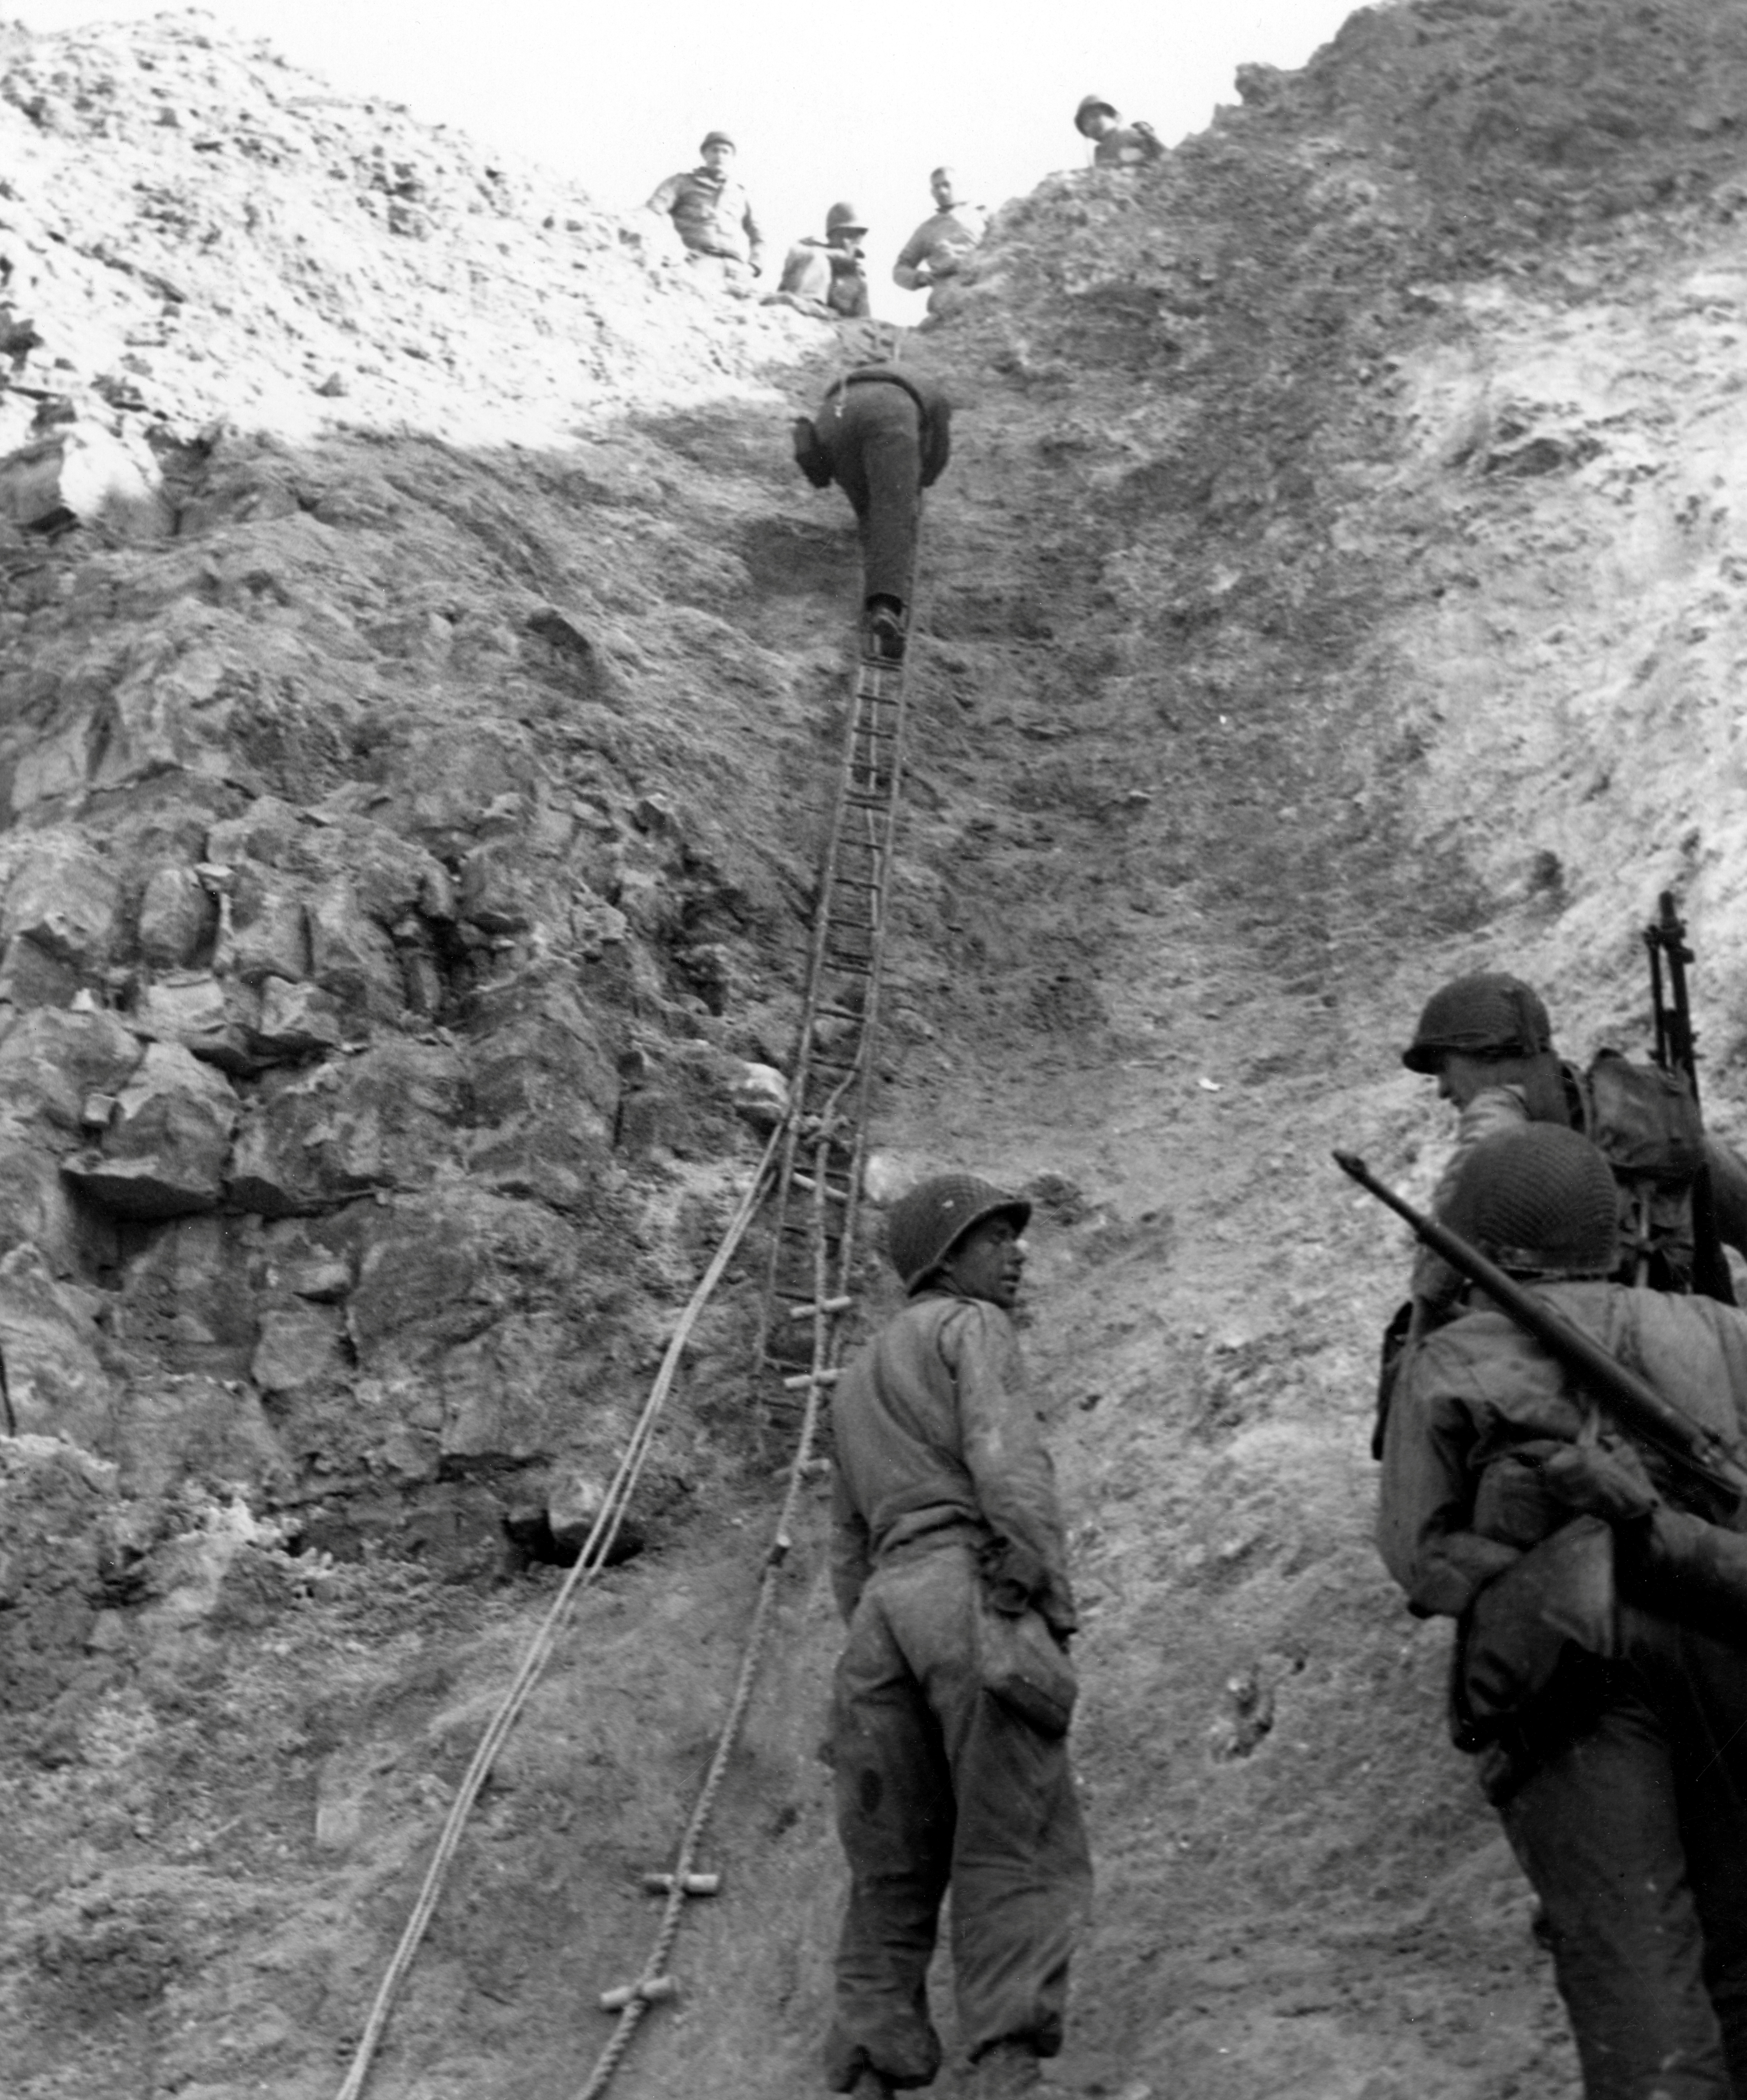 U.S. Army Rangers show off the ladders they used to storm the cliffs which they assaulted in support of Omaha Beach landings on D-Day in Pointe du Hoc